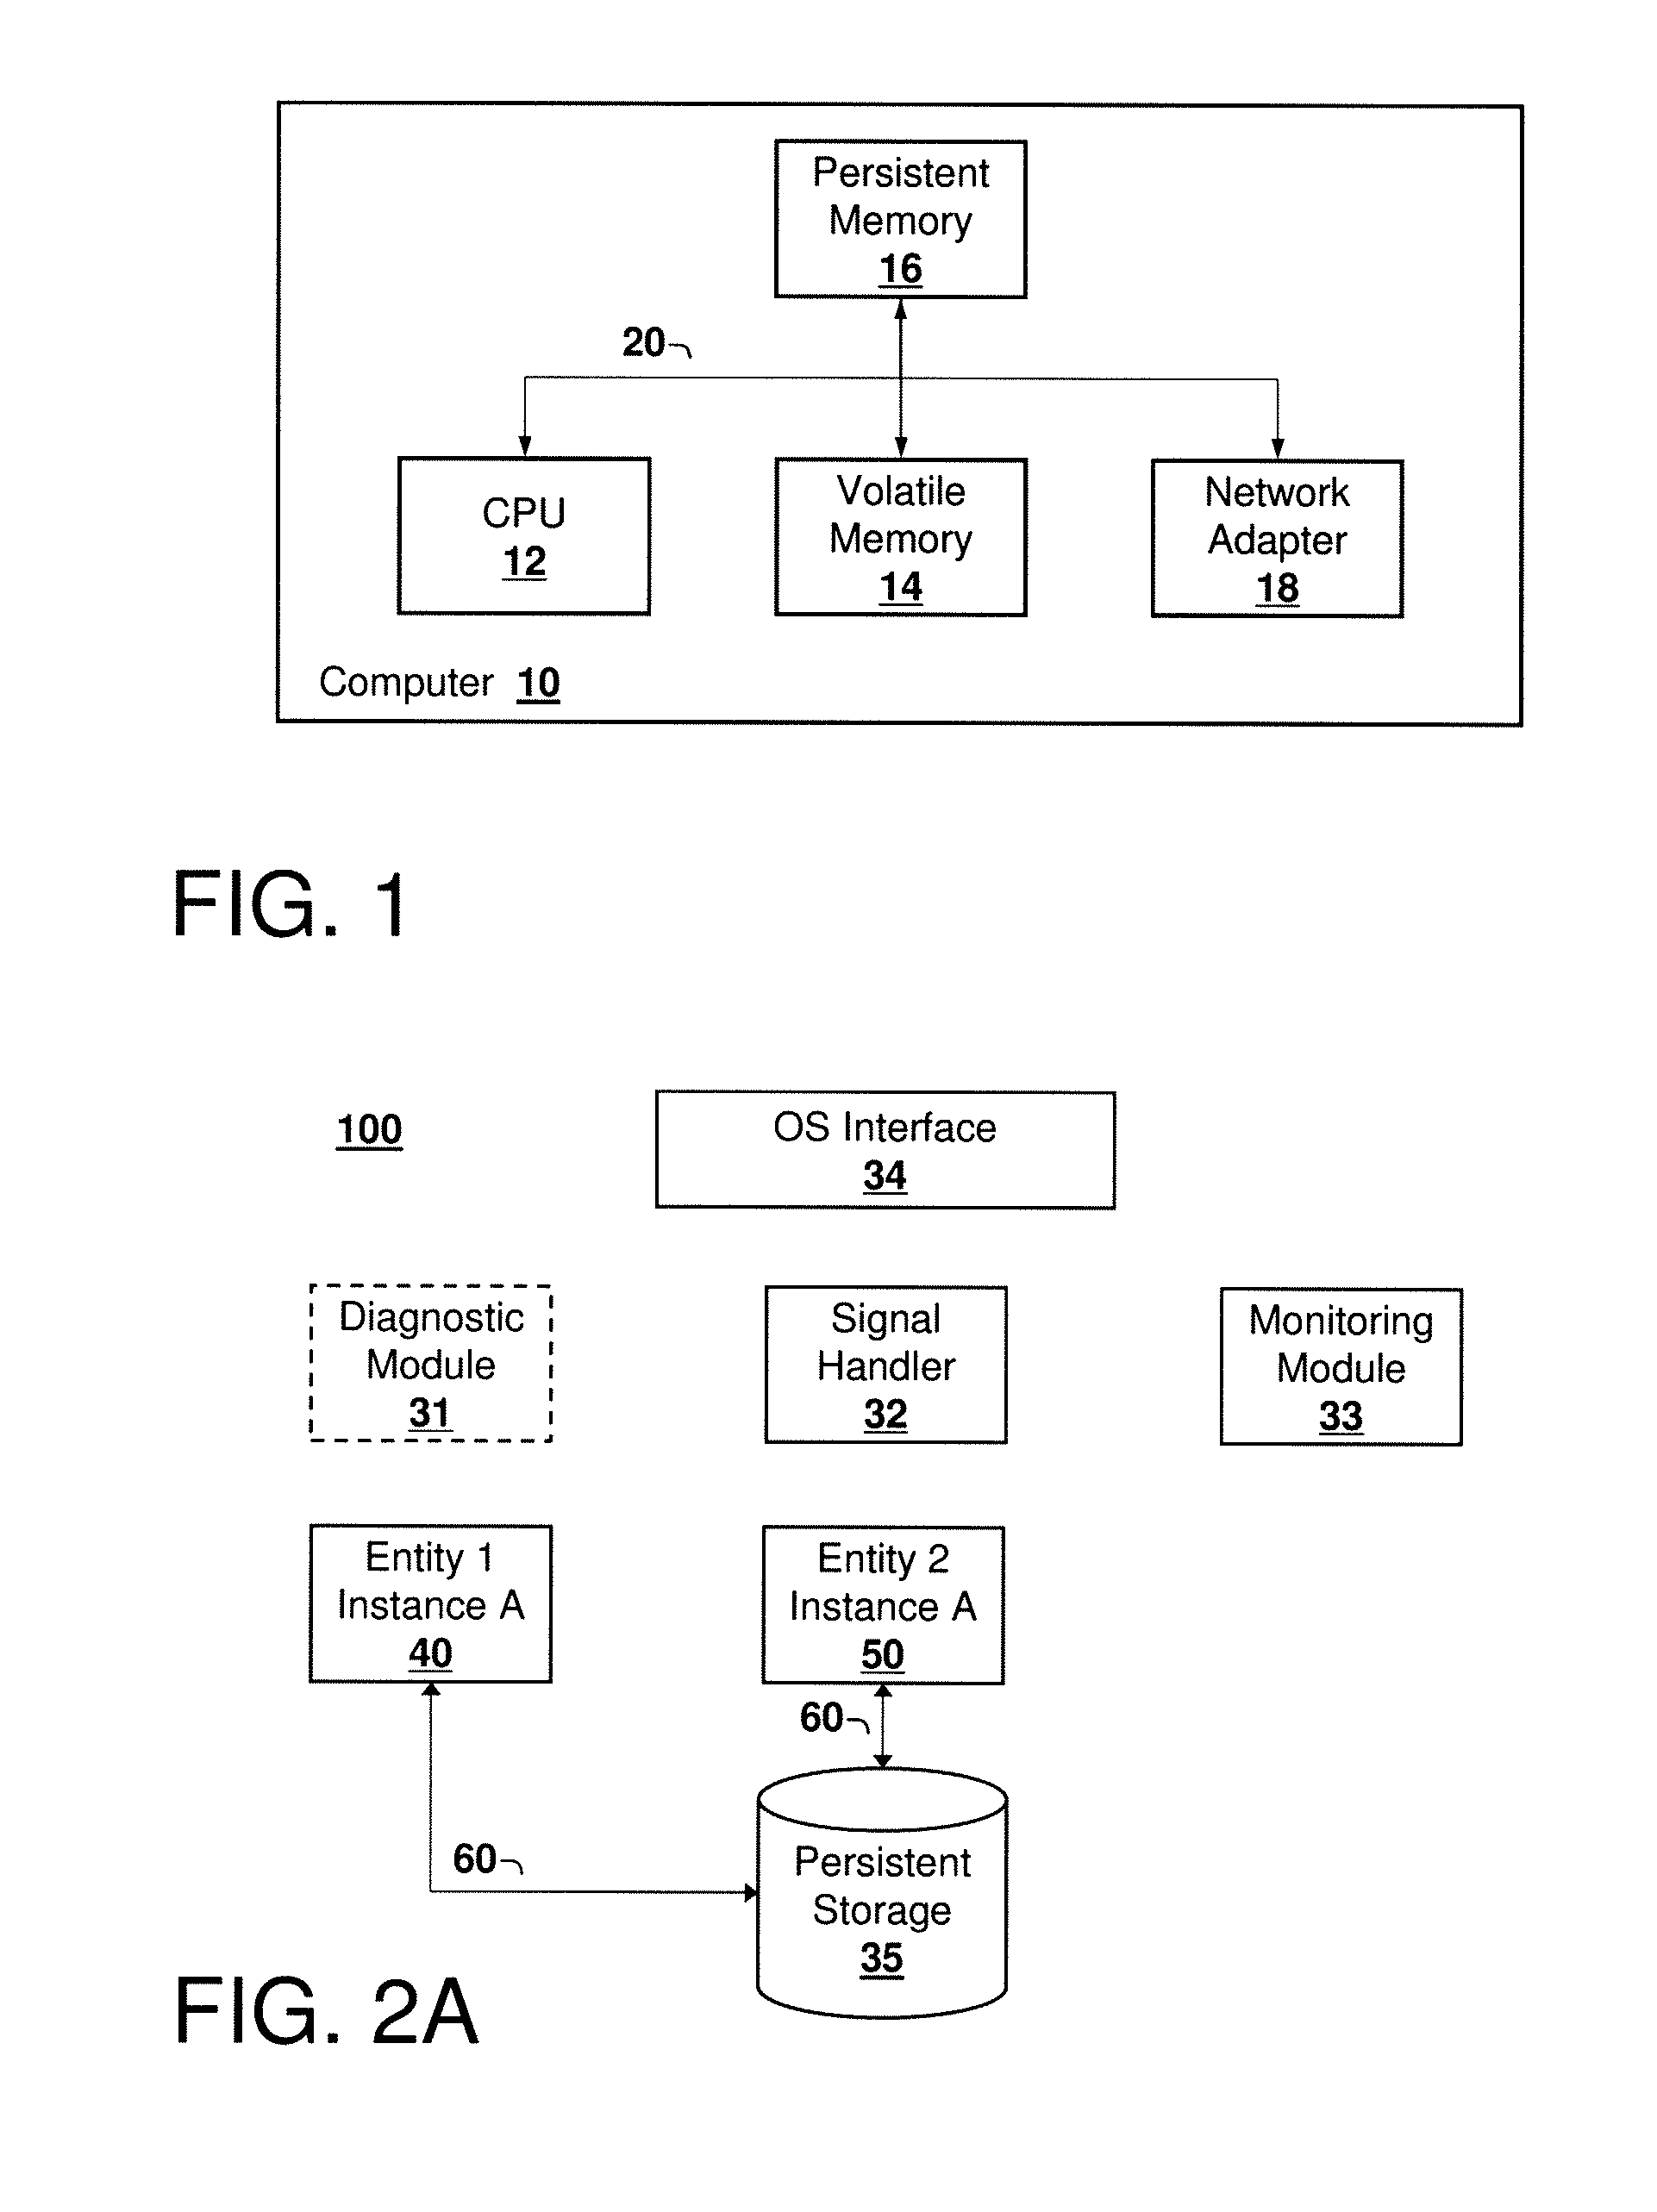 Failure Detection and Fencing in a Computing System